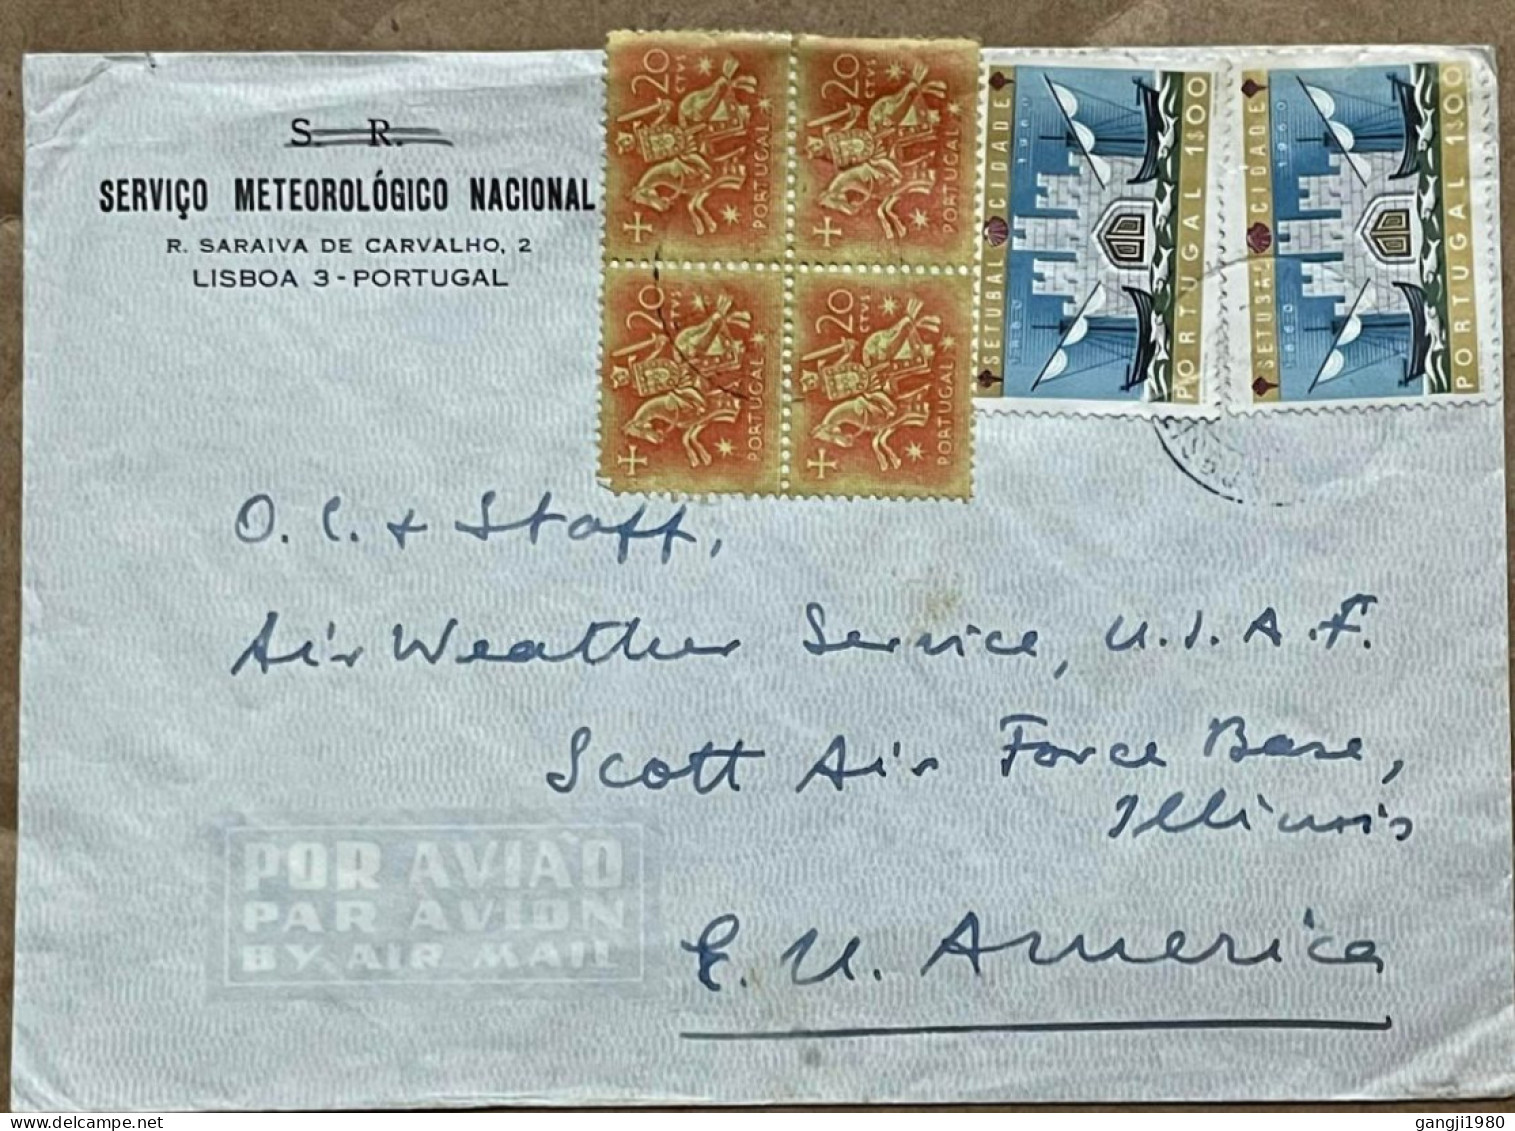 PORTUGAL 1960, COVER USED TO USA, ADVERTISING NATIONAL WEATHER SERVICE, SETUBAL CITY ARM, FORT, BOAT & SEA, HORSE RIDER - Lettres & Documents